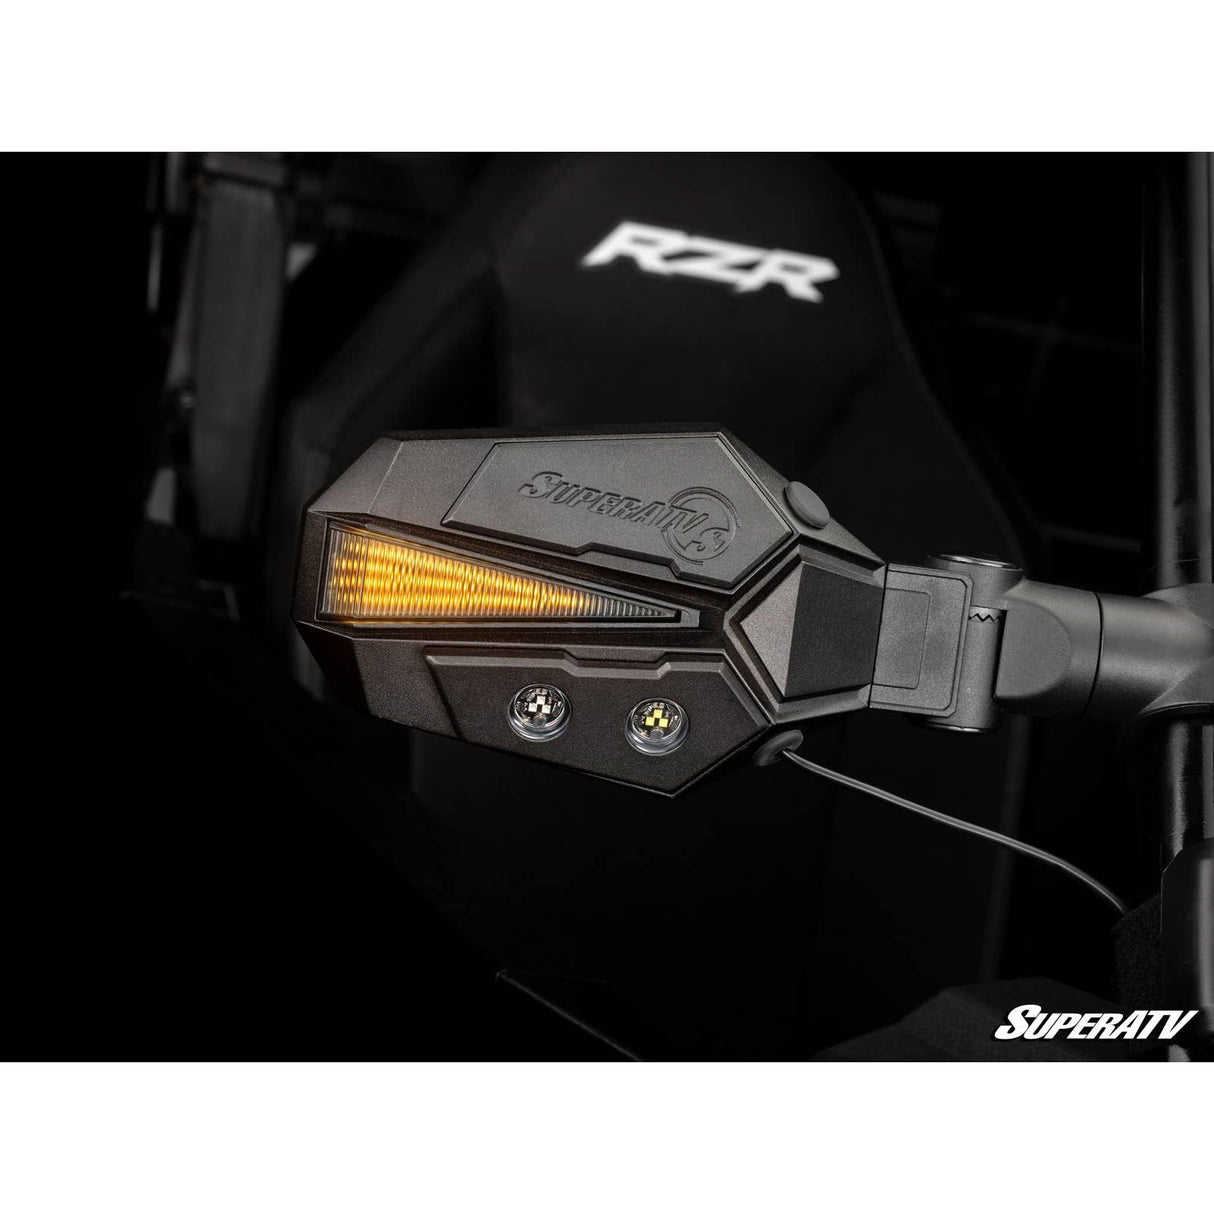 Polaris Lighted Side-View Mirrors